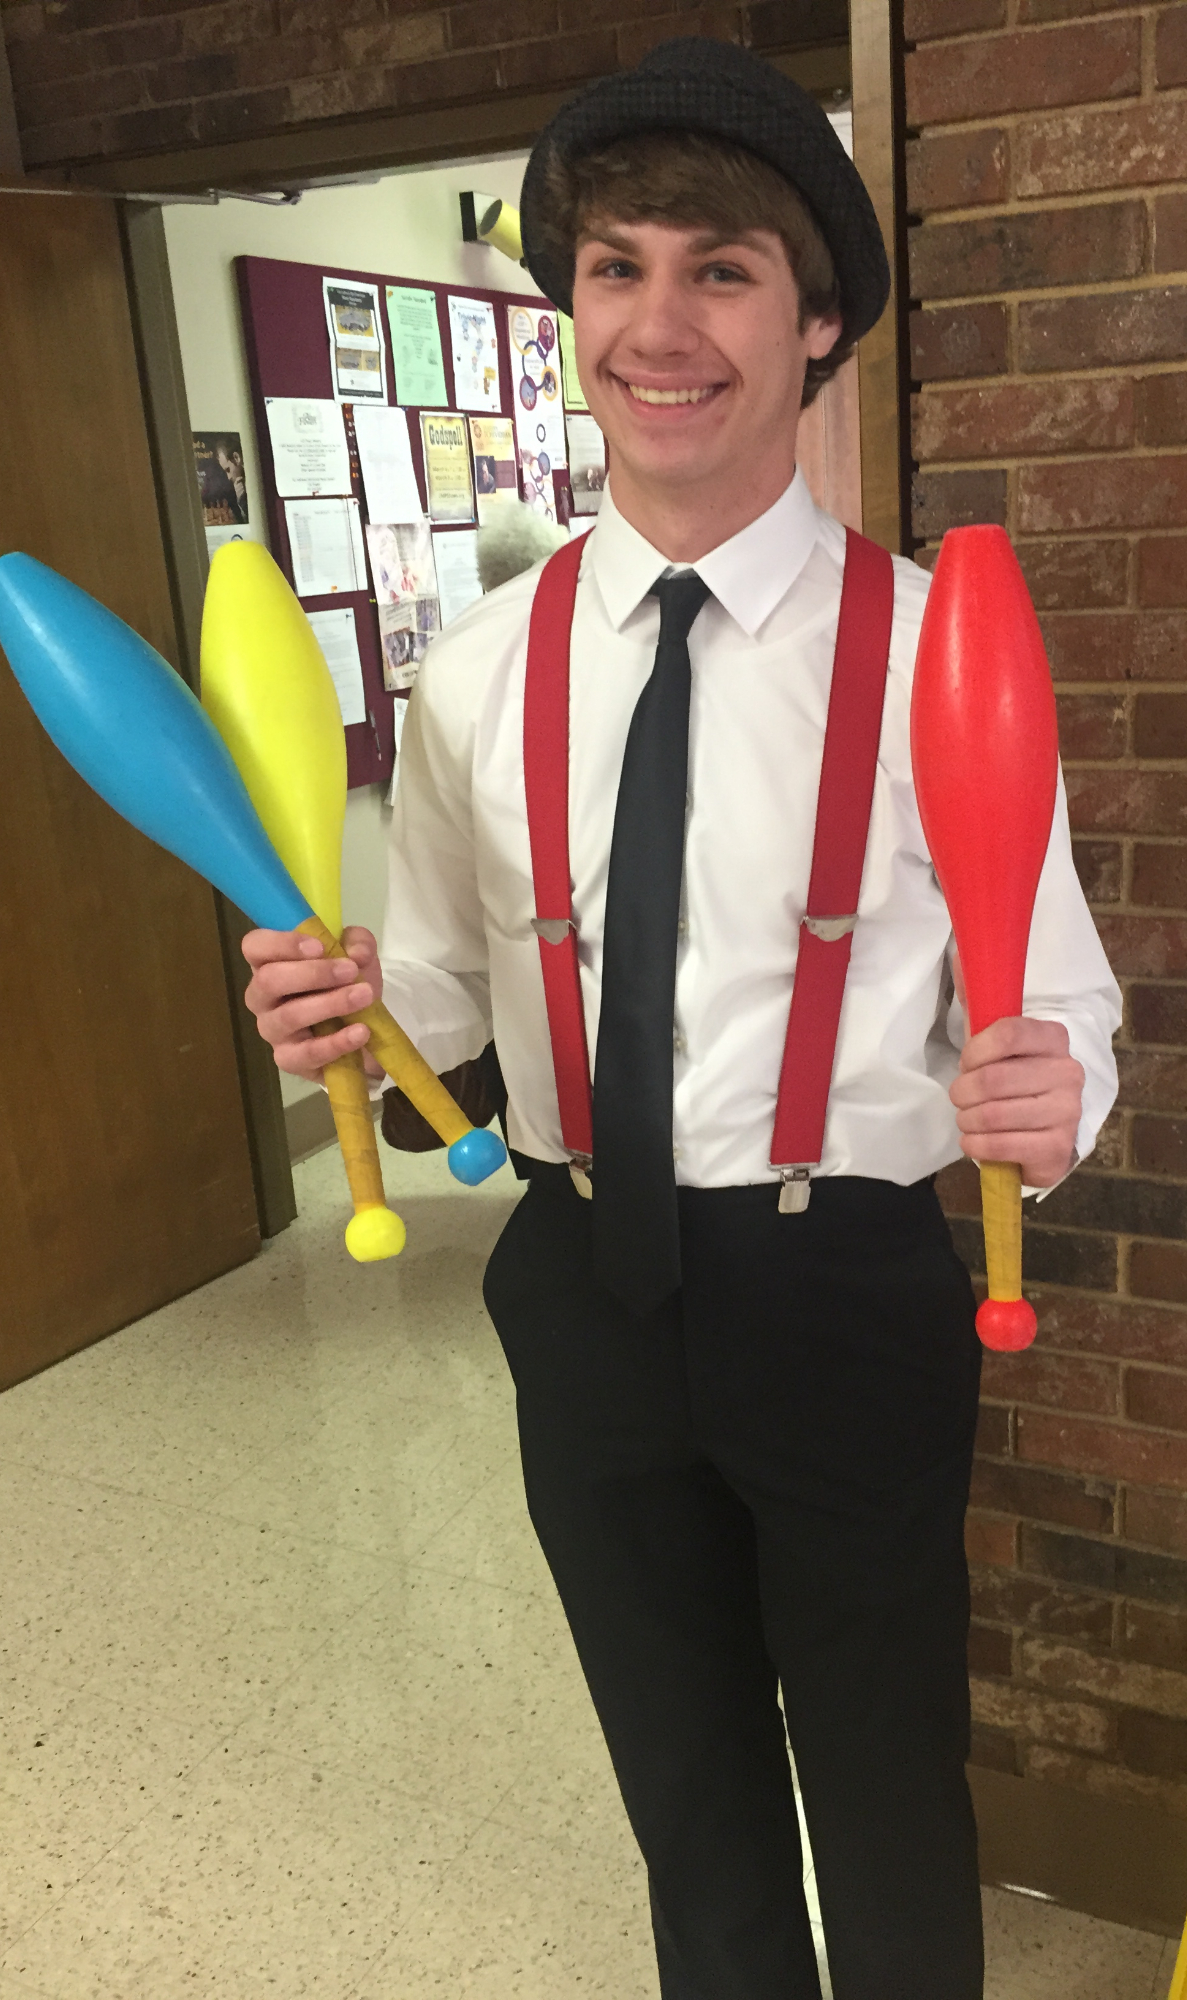 Jacob juggling at an event